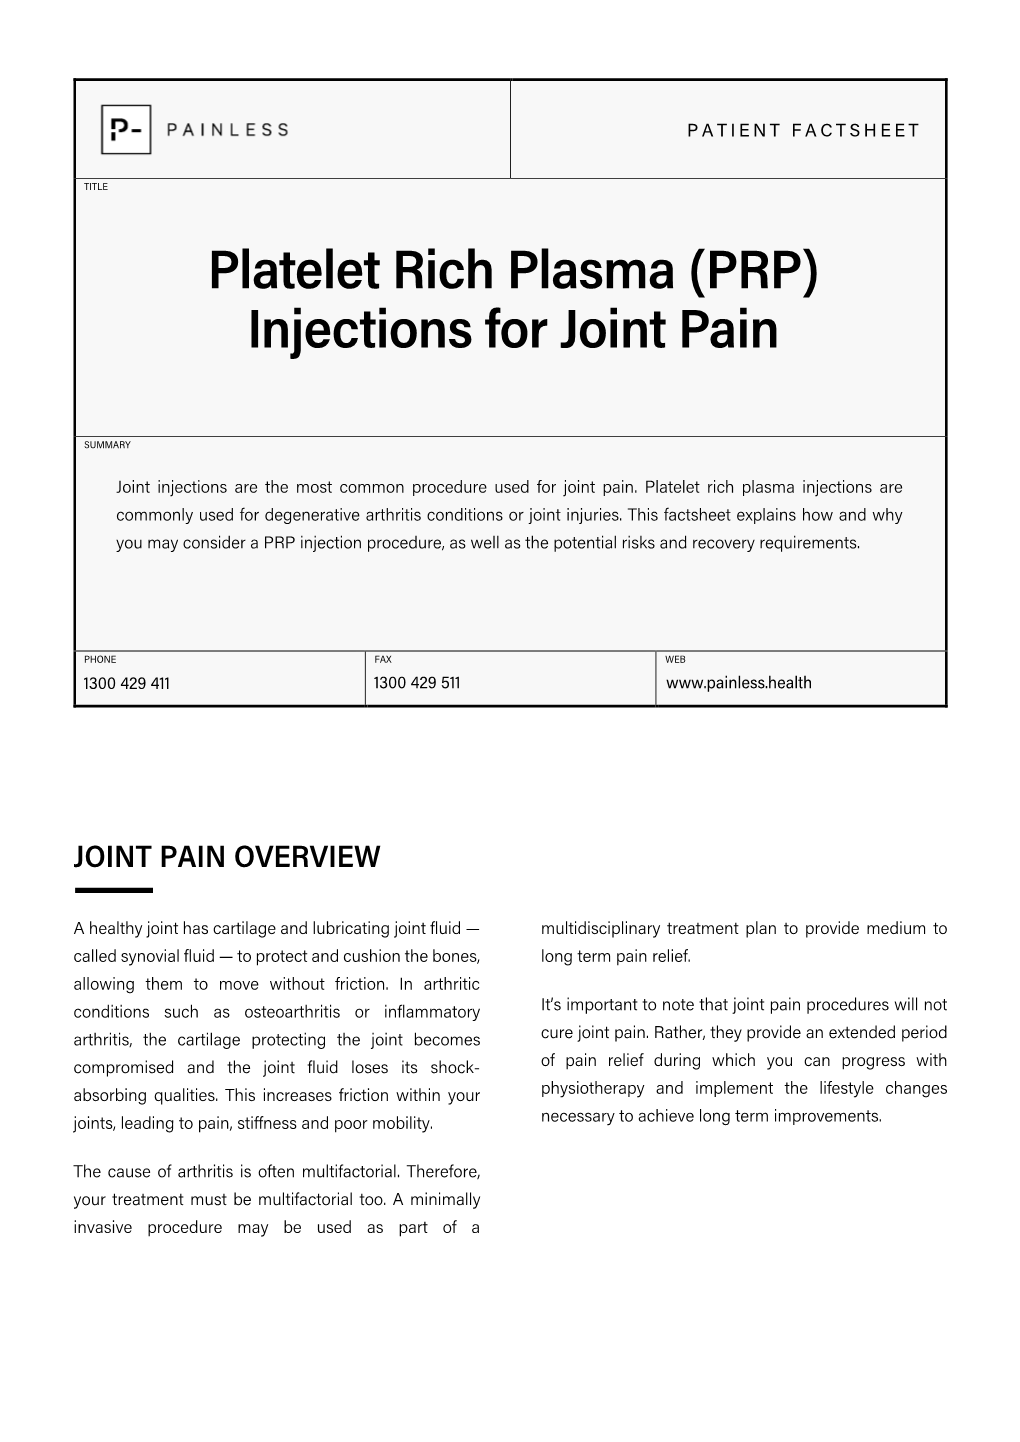 Platelet Rich Plasma (PRP) Injections for Joint Pain